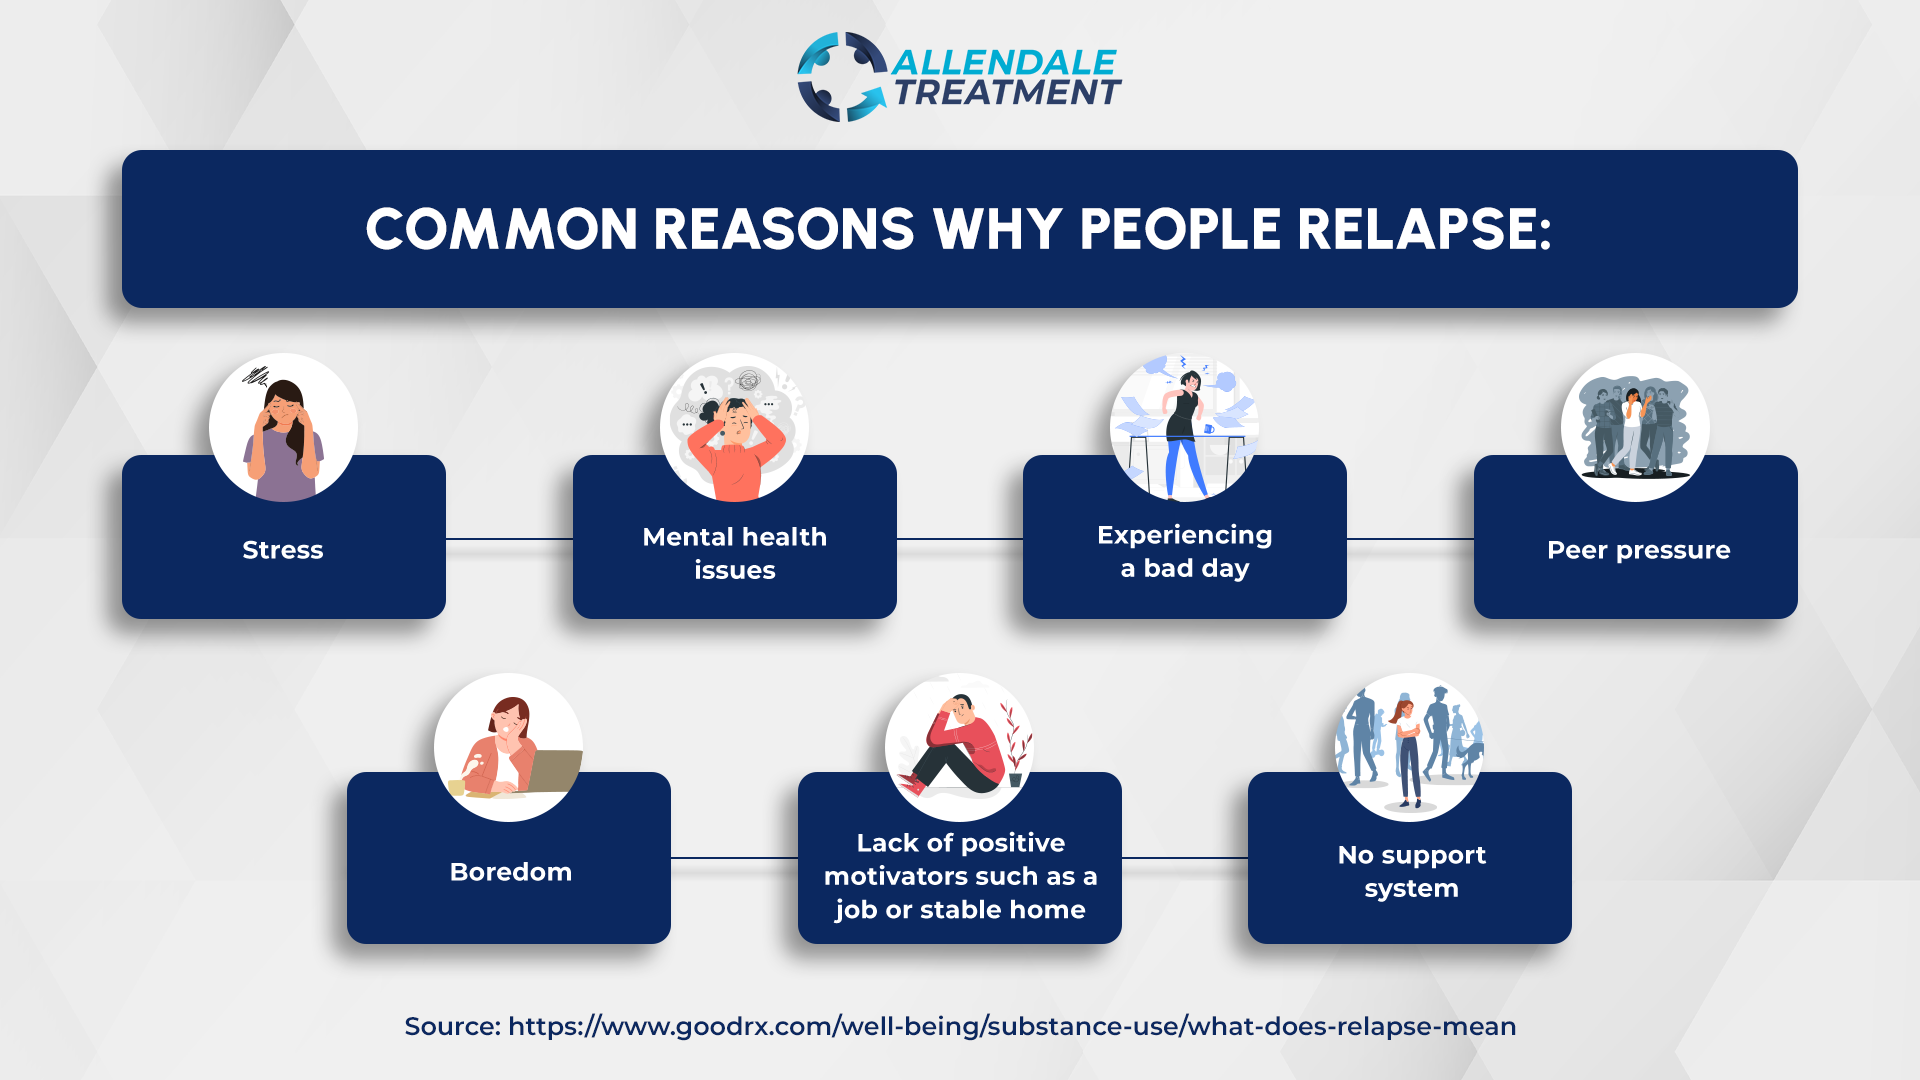 Common reasons for relapse infographic